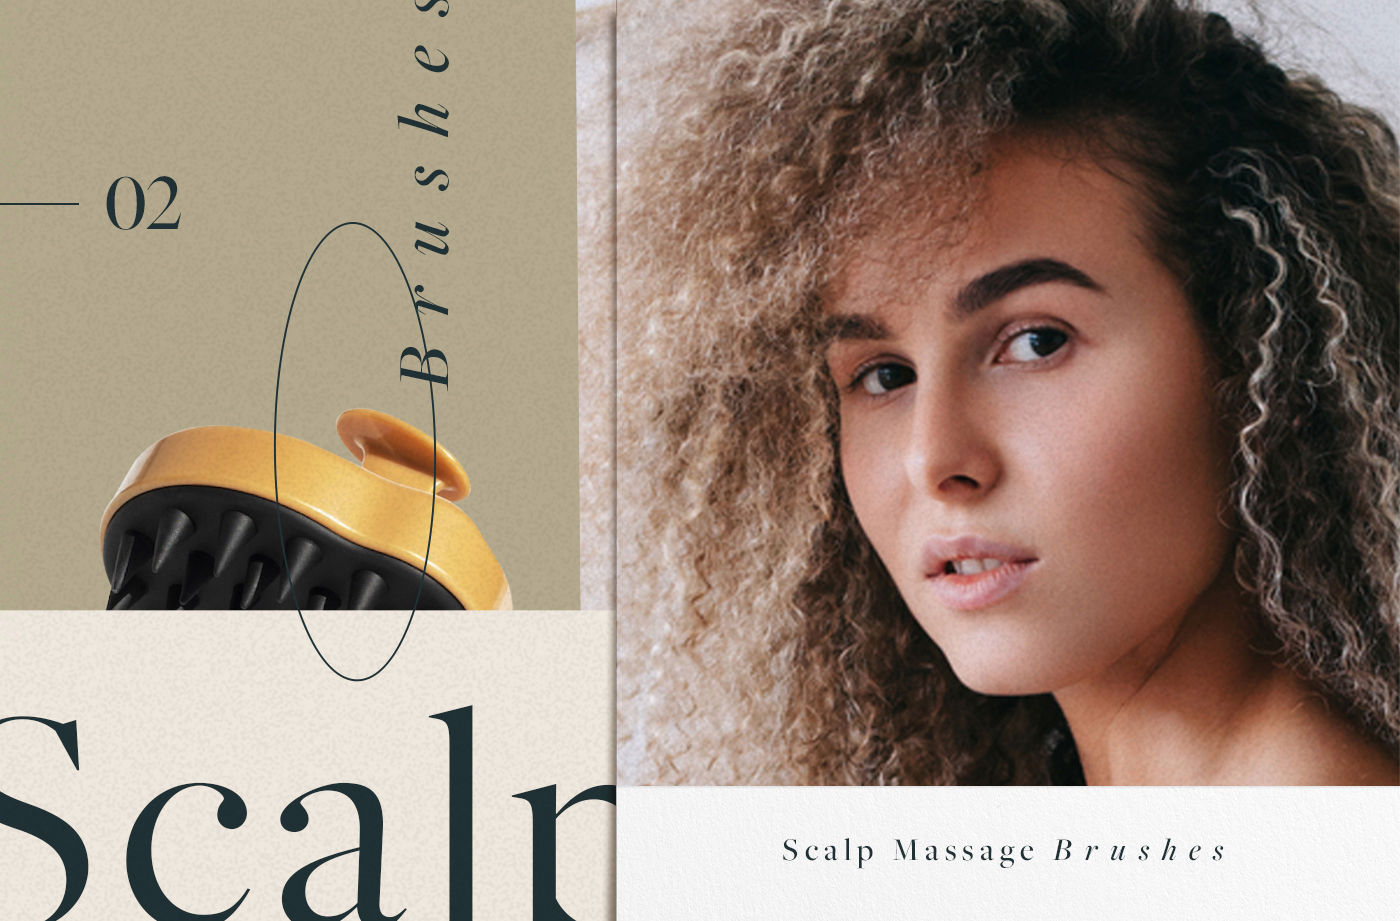 Scalp Massage Brush for Hair Growth: How to Use the Tool | Well+Good